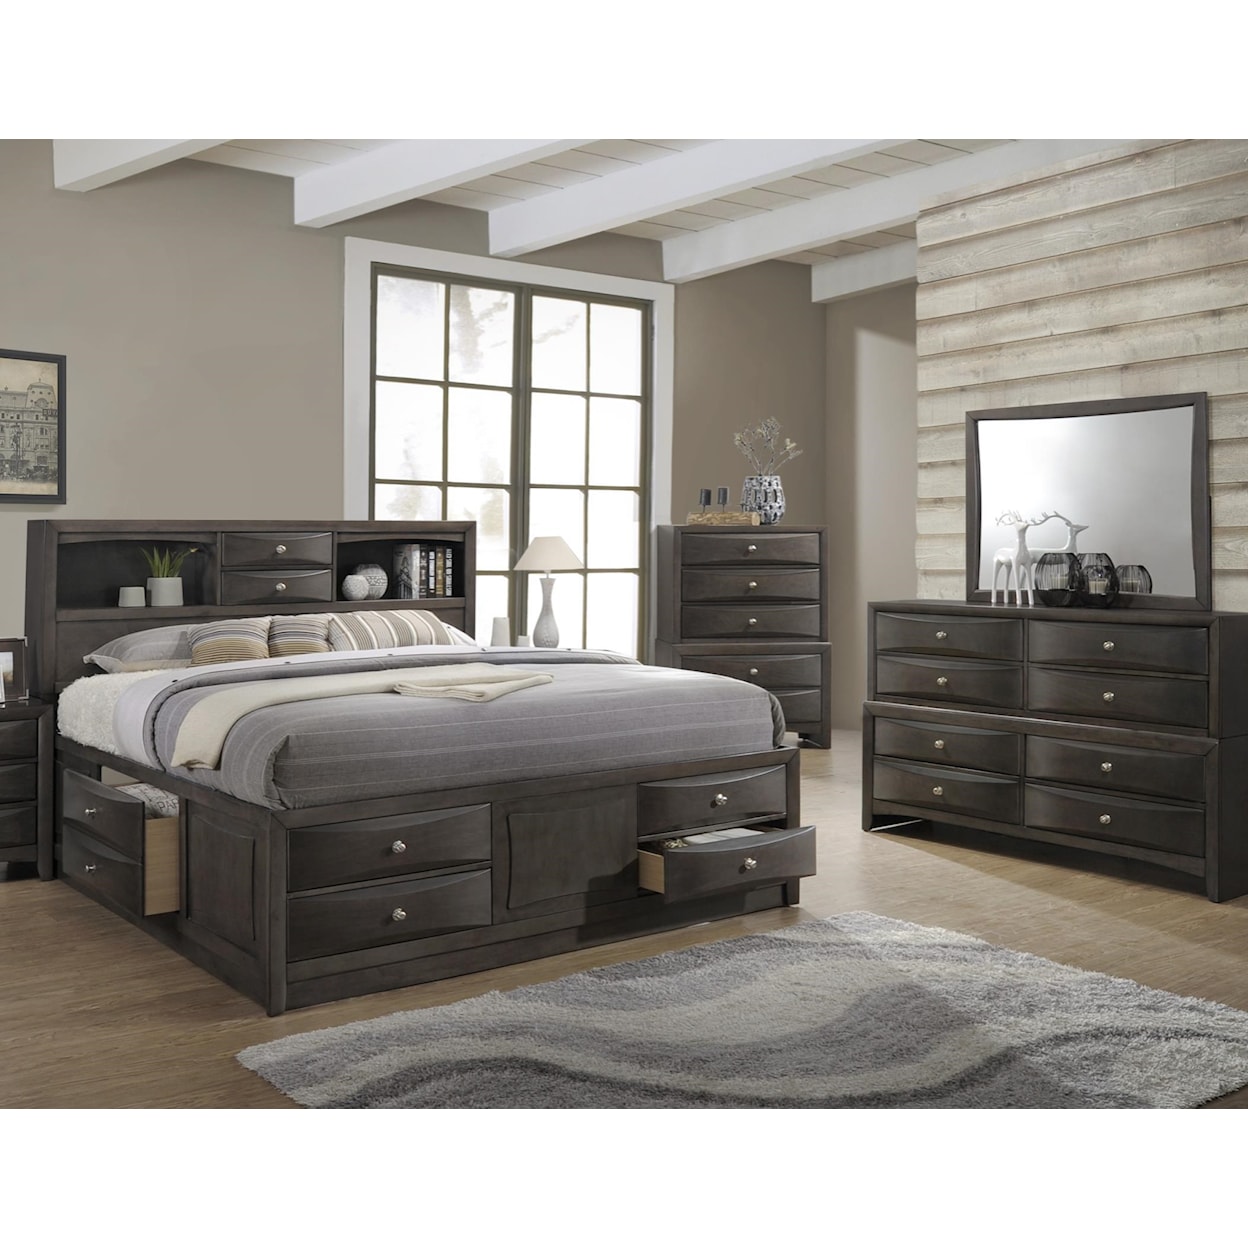 Lifestyle Todd Gray Queen 5 Piece Bedroom Group